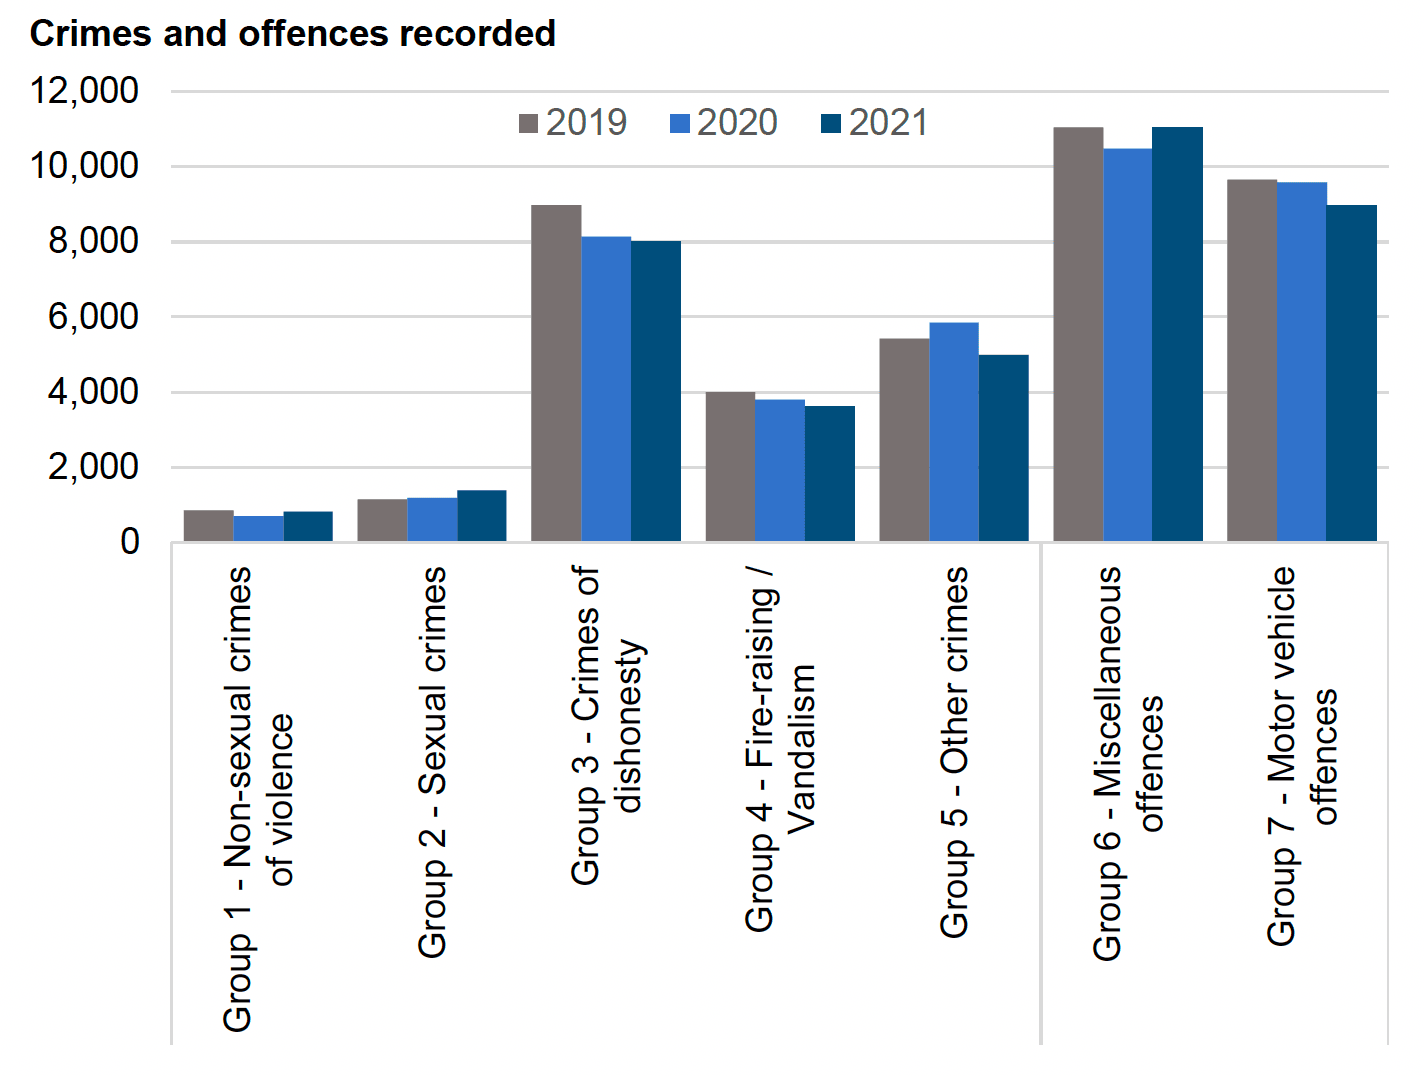 Bar chart showing total crimes and offences recorded across October 2019, 2020 and 2021